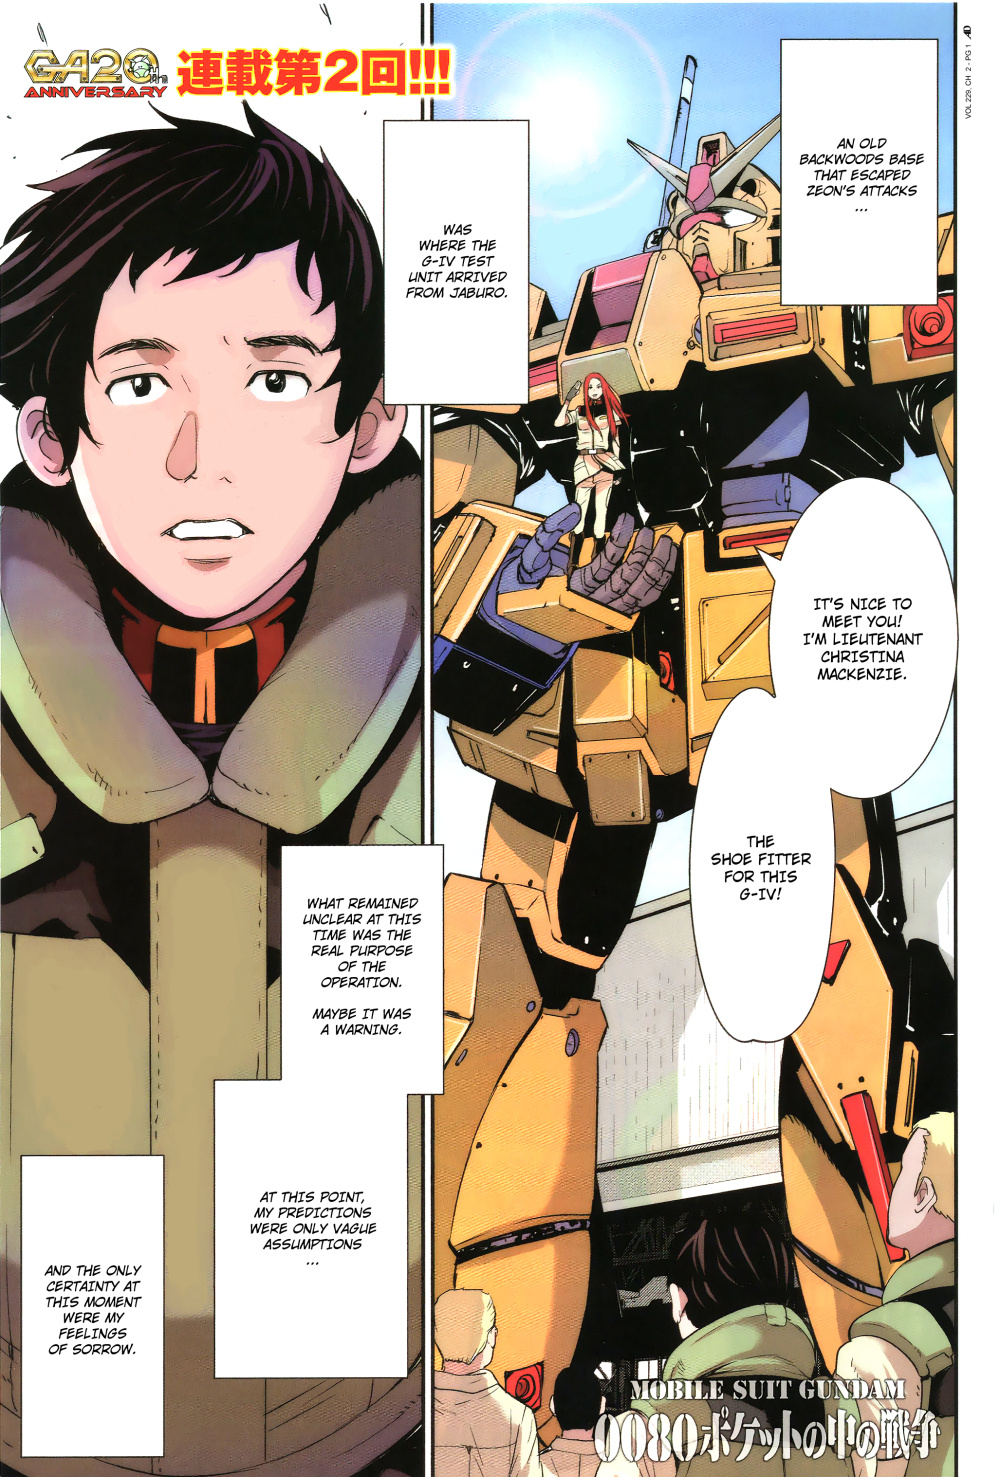 Mobile Suit Gundam 0080 - War In The Pocket Chapter 2 #1